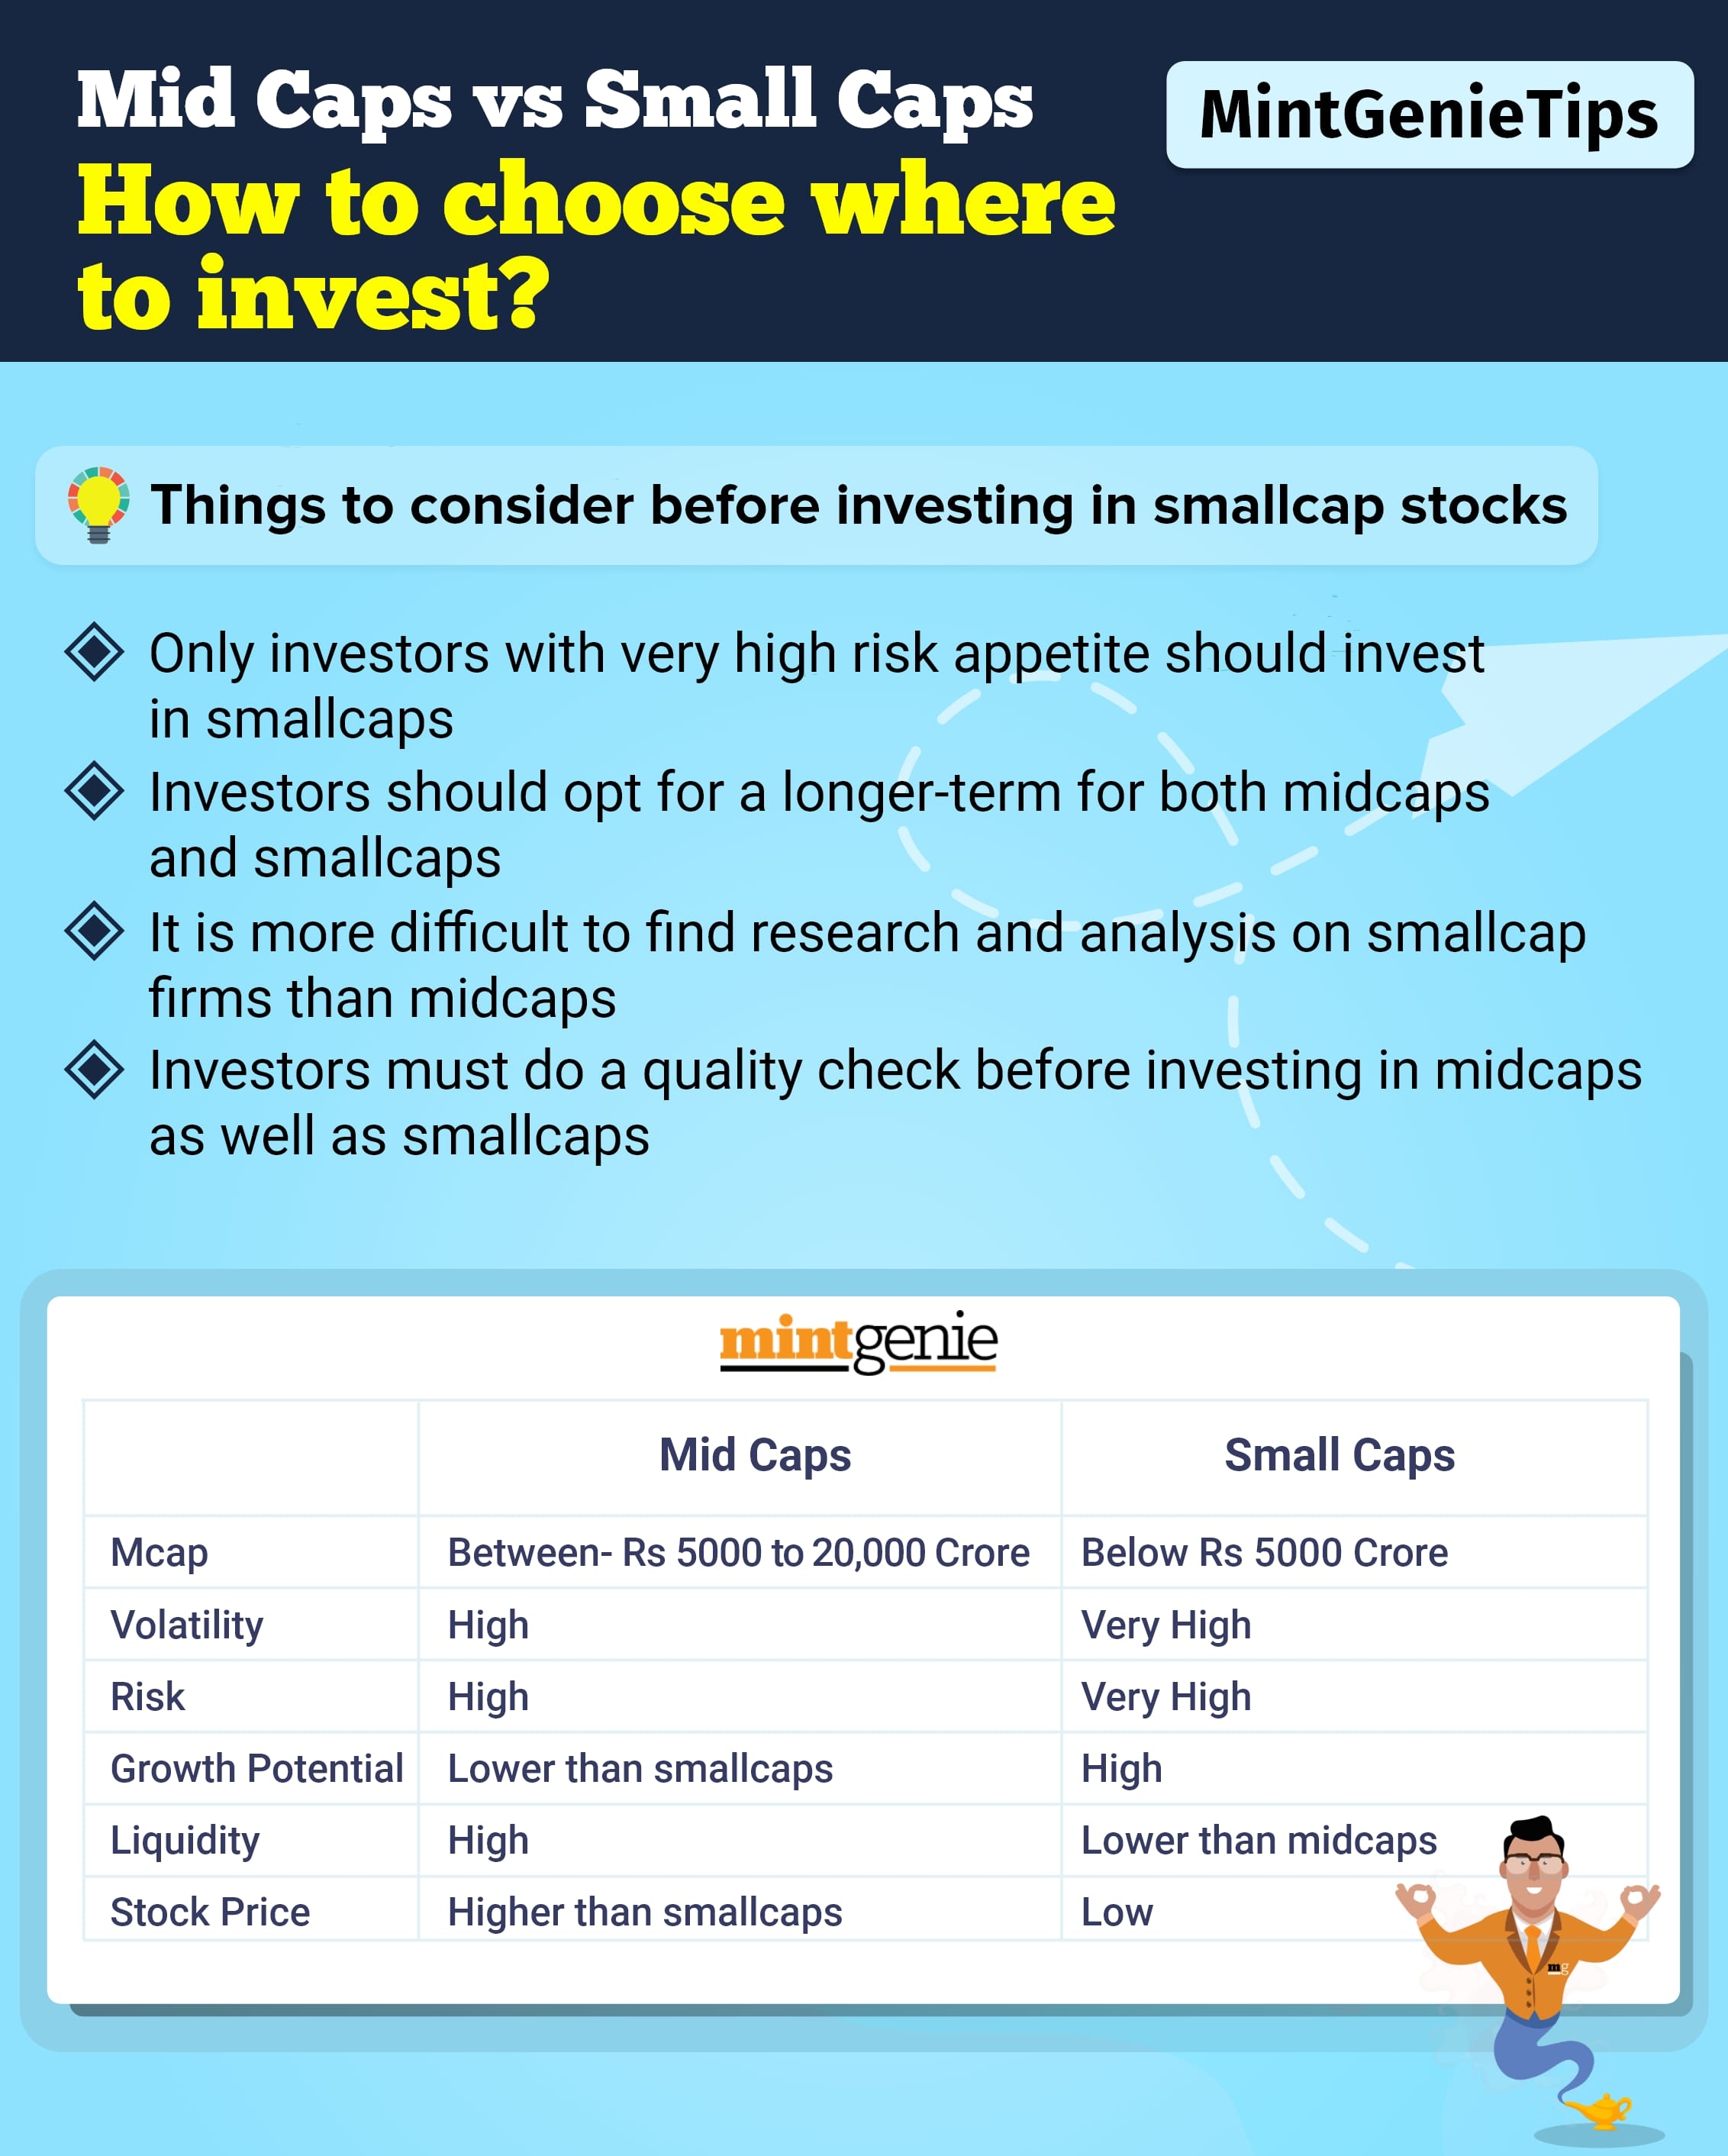 Here we explain how to choose where to invest: mid caps vs small caps